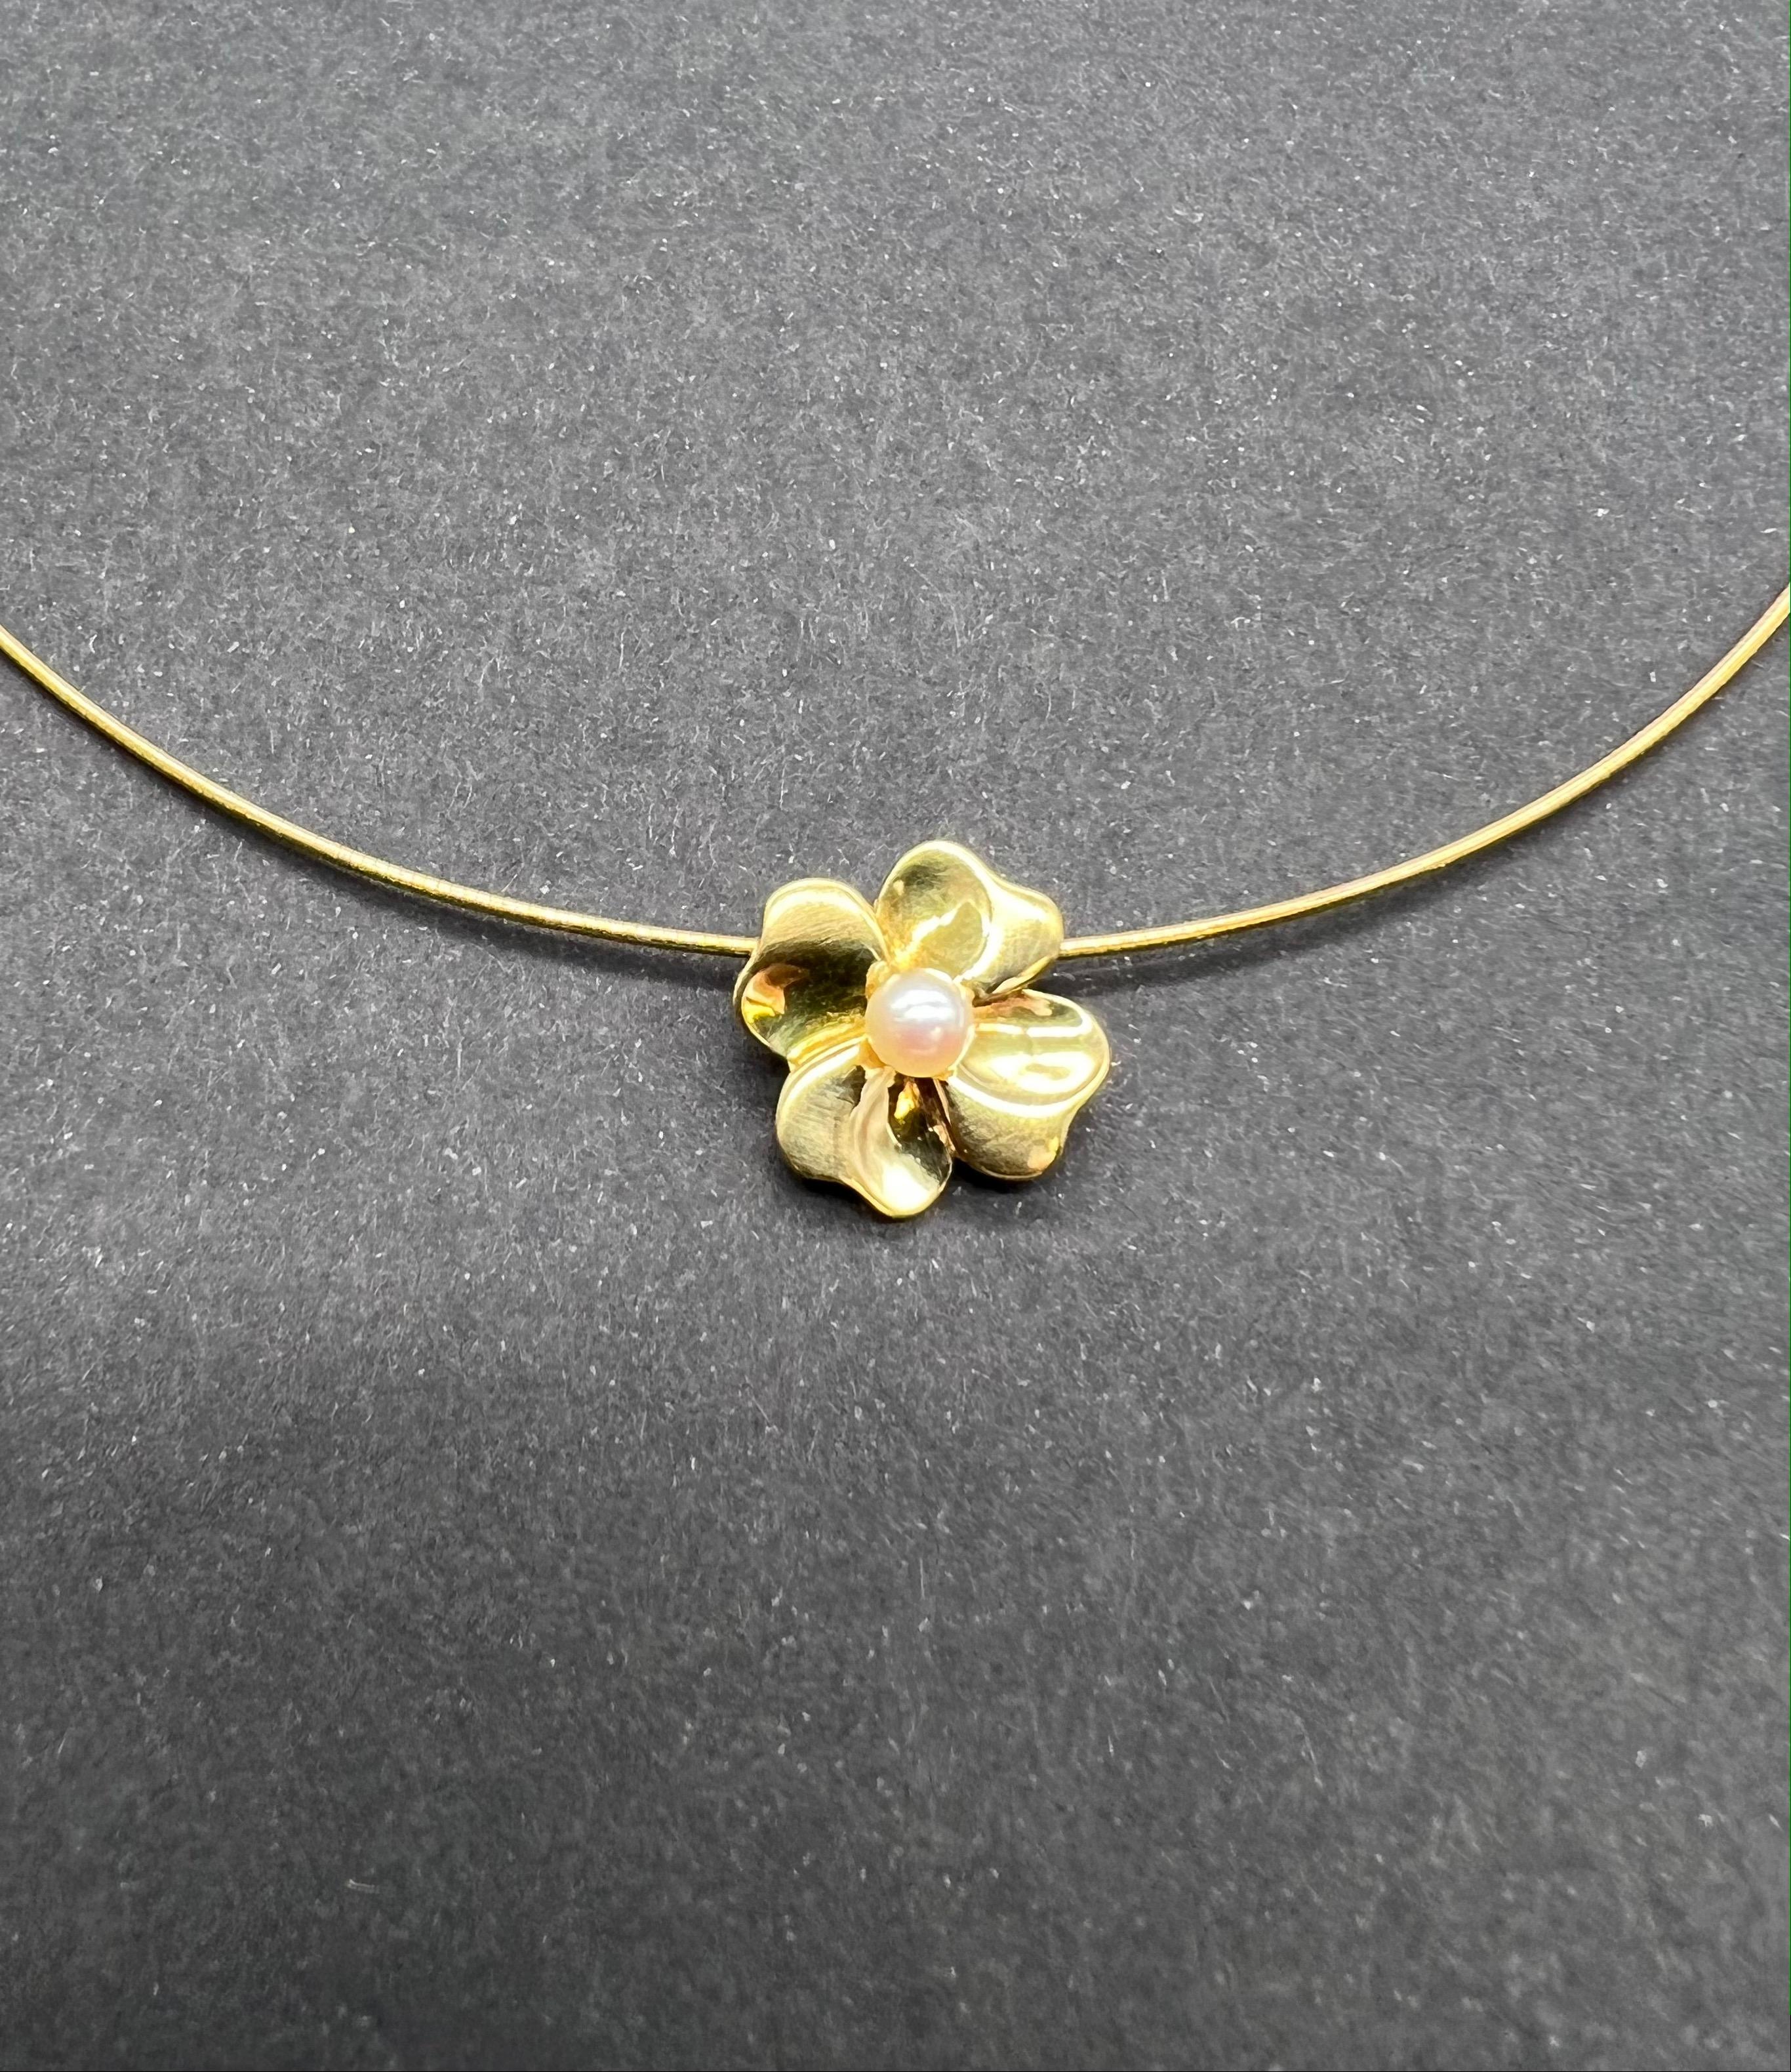 Semi-Rigid Omega Mesh Necklace with Flower Pendant and Cultured Pearl. 

Semi-rigid omega mesh necklace in 18 Carat yellow gold accompanied by a flower or 4-leaf clover pendant and surmounted by a cultured pearl. This pretty necklace from the 1980s